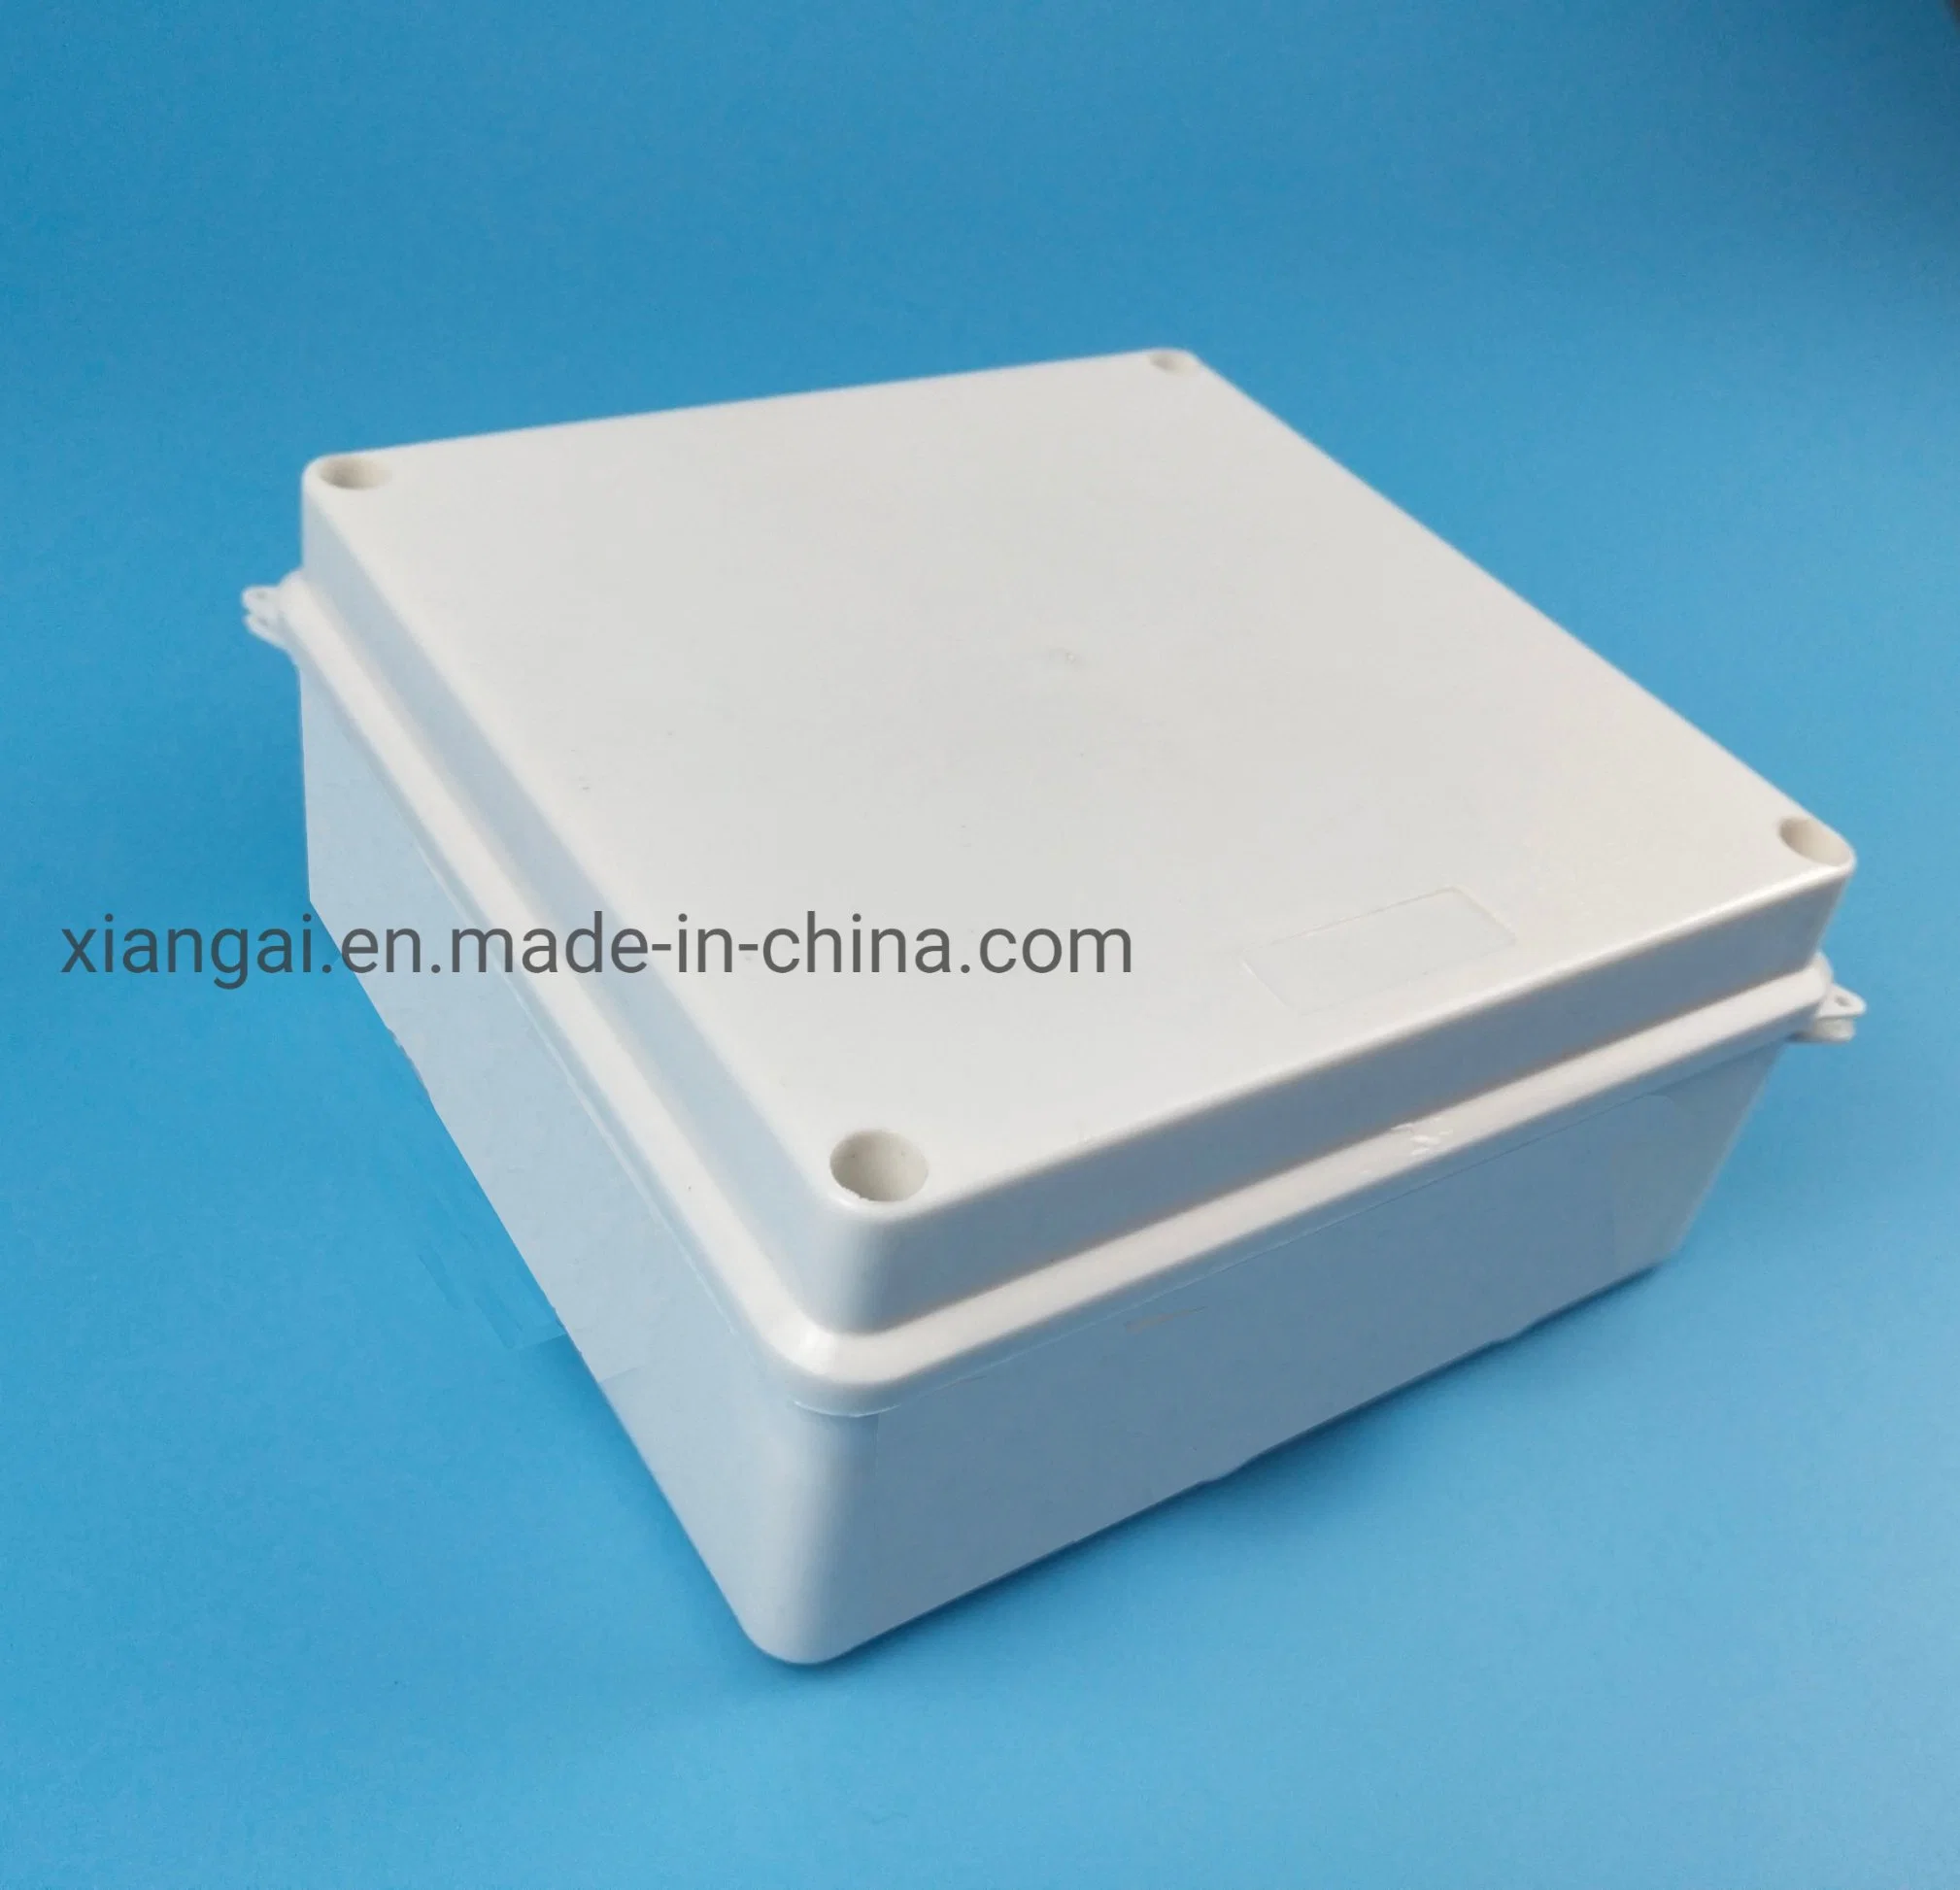 Plastic Electrical IP65 Water-Proof Connection Box Breaker Box Distribution Box Manufacture